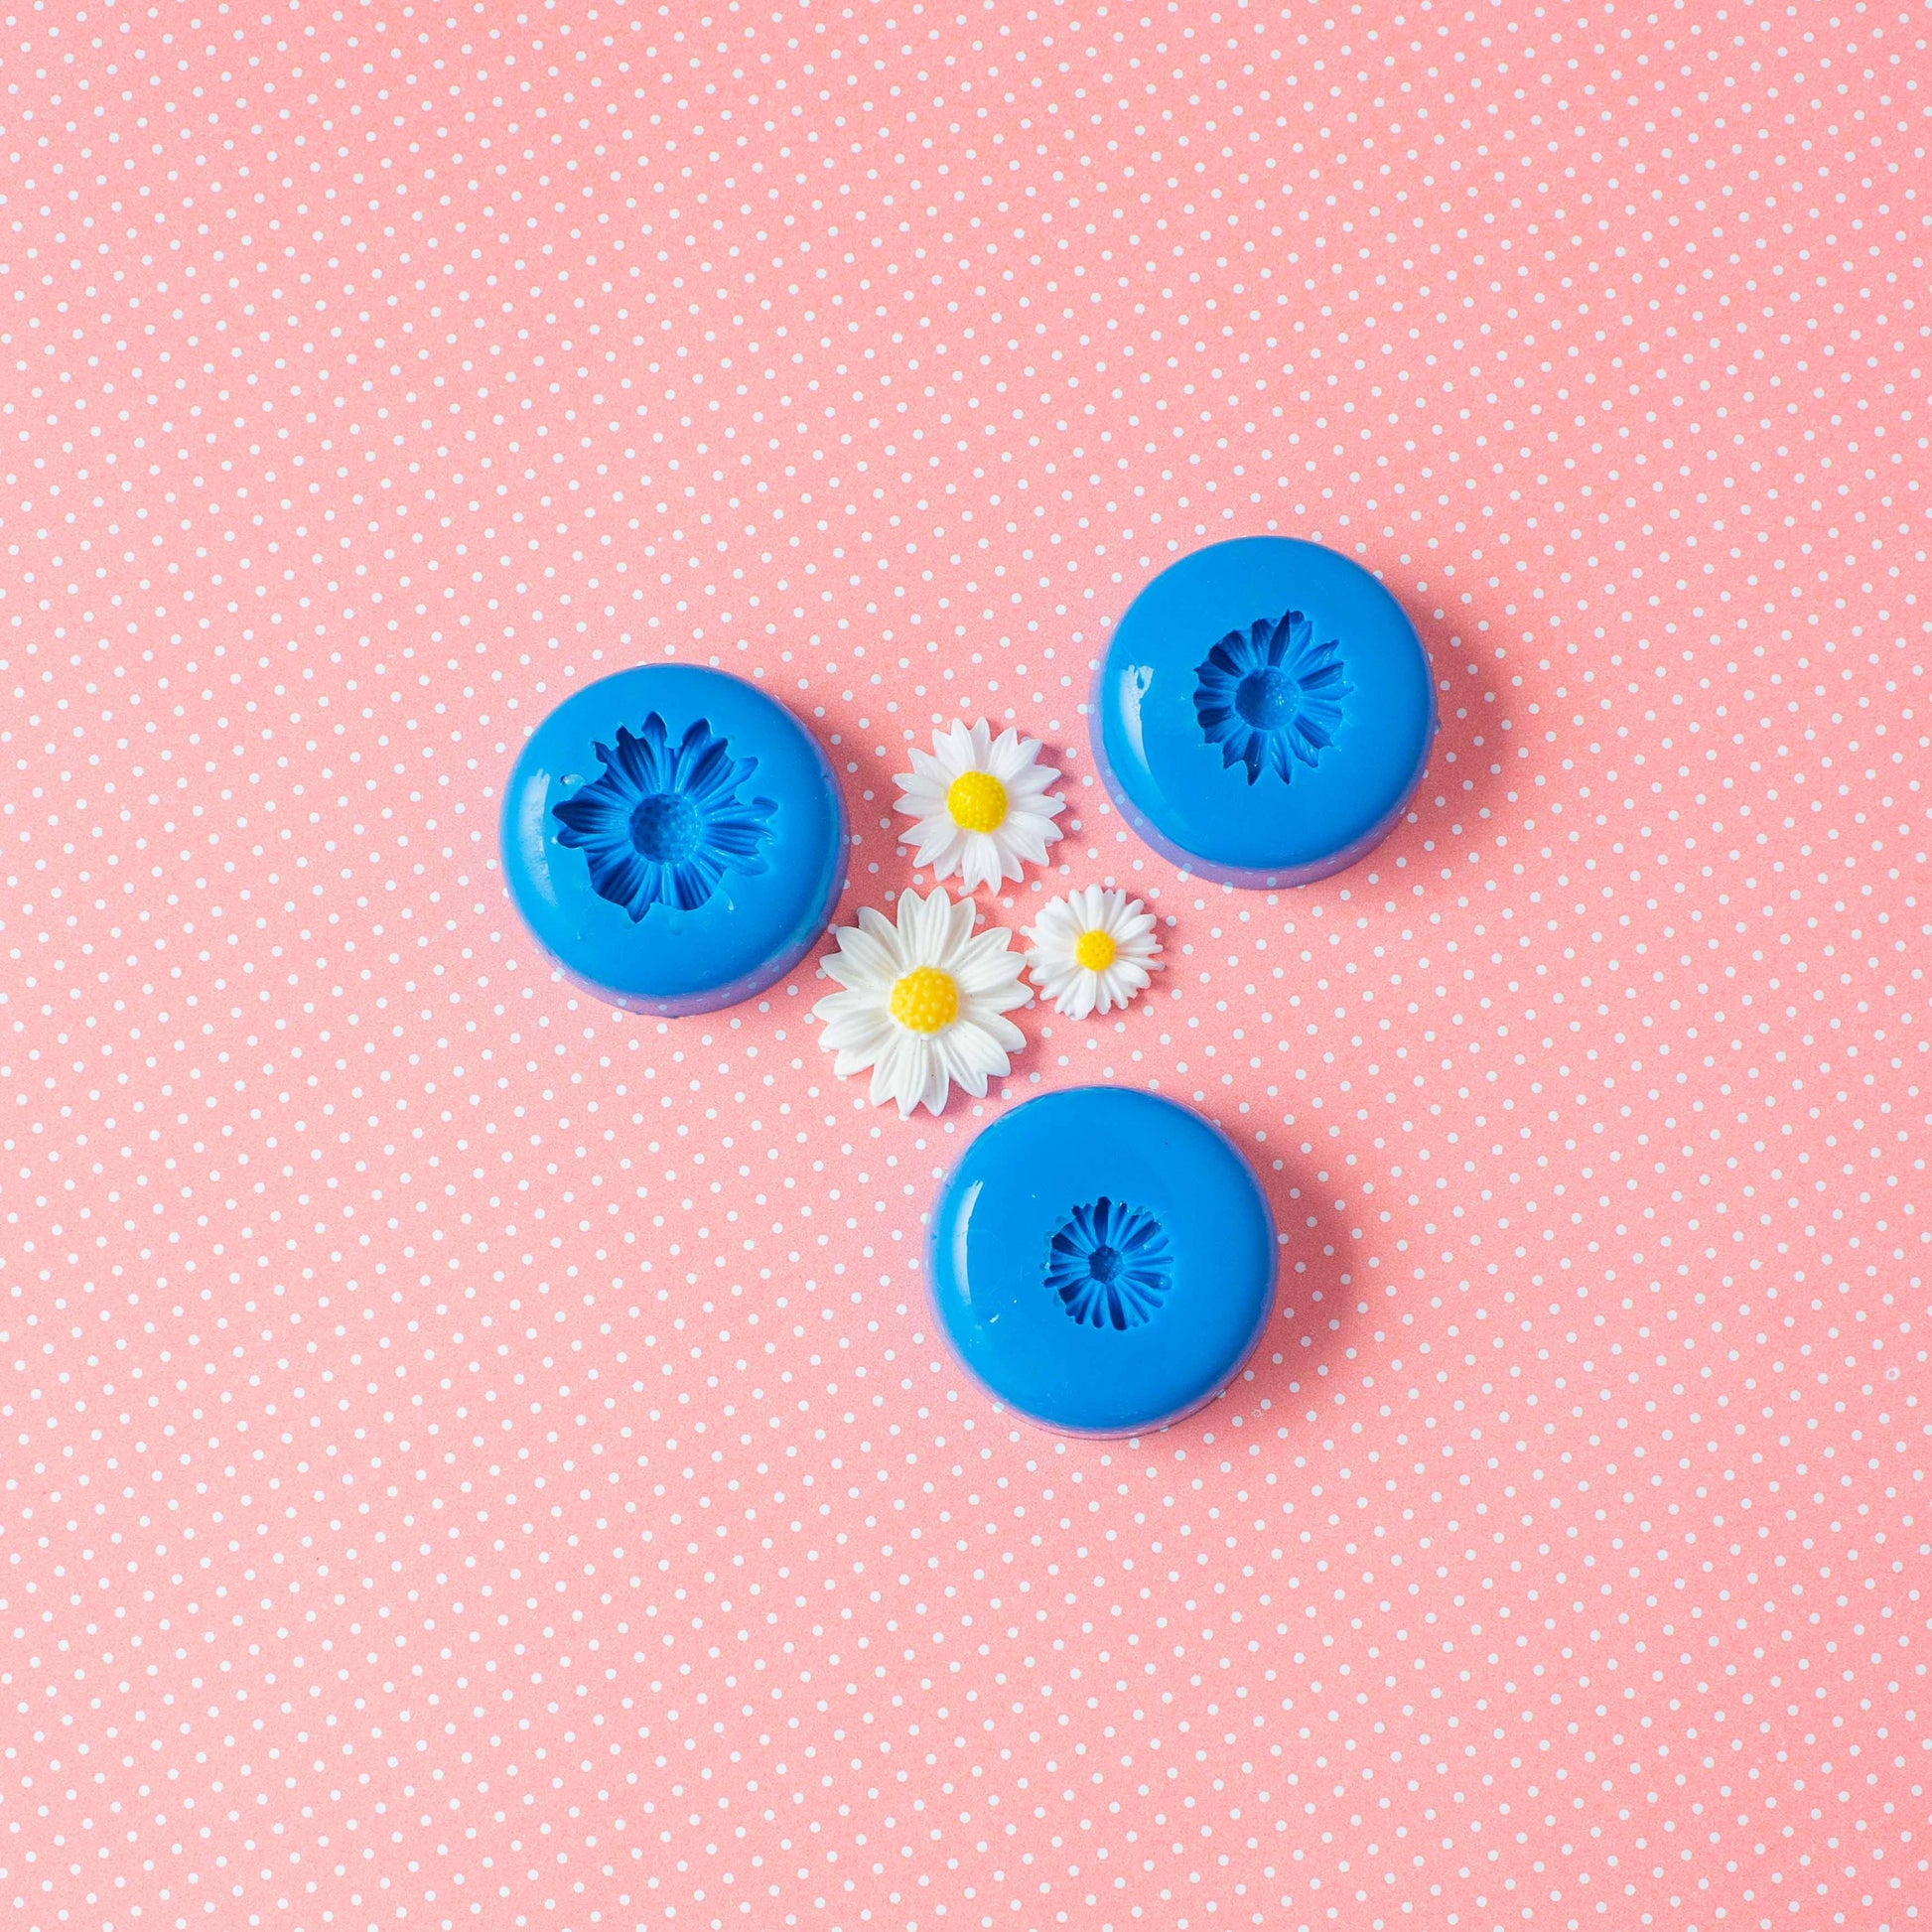 A set of 3 flower silicone molds and three daisies in a pink polka dots background.